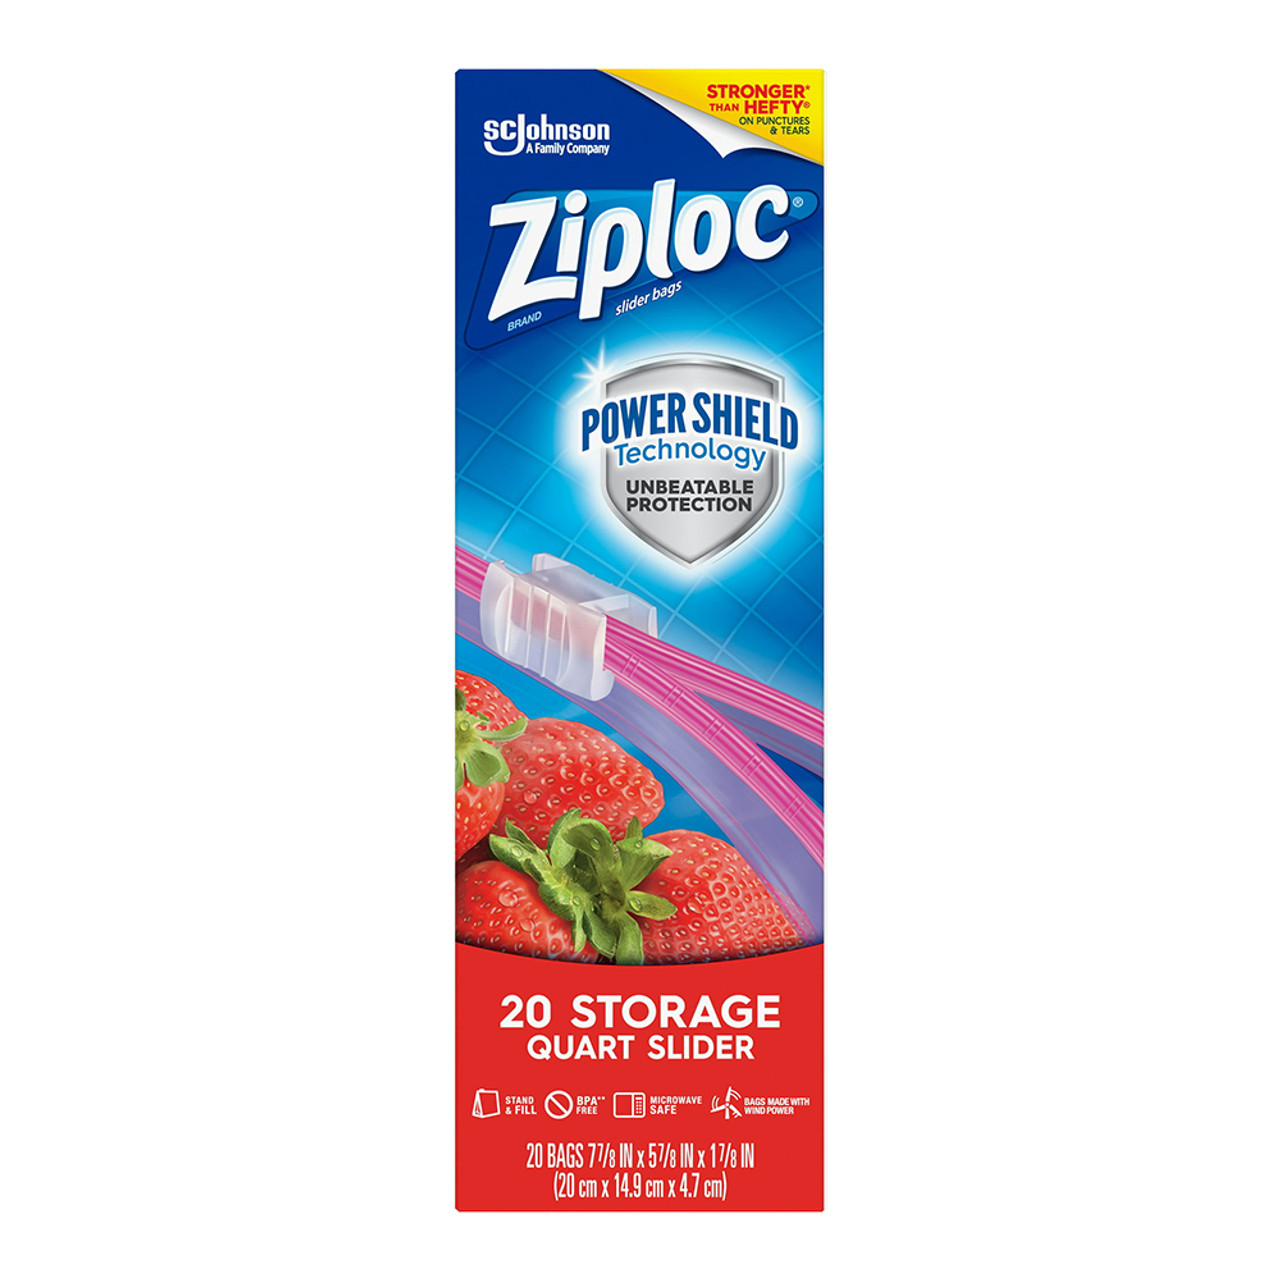 Ziploc Brand Quart Storage Bags with Grip 'n Seal Technology, 48 ct - Foods  Co.